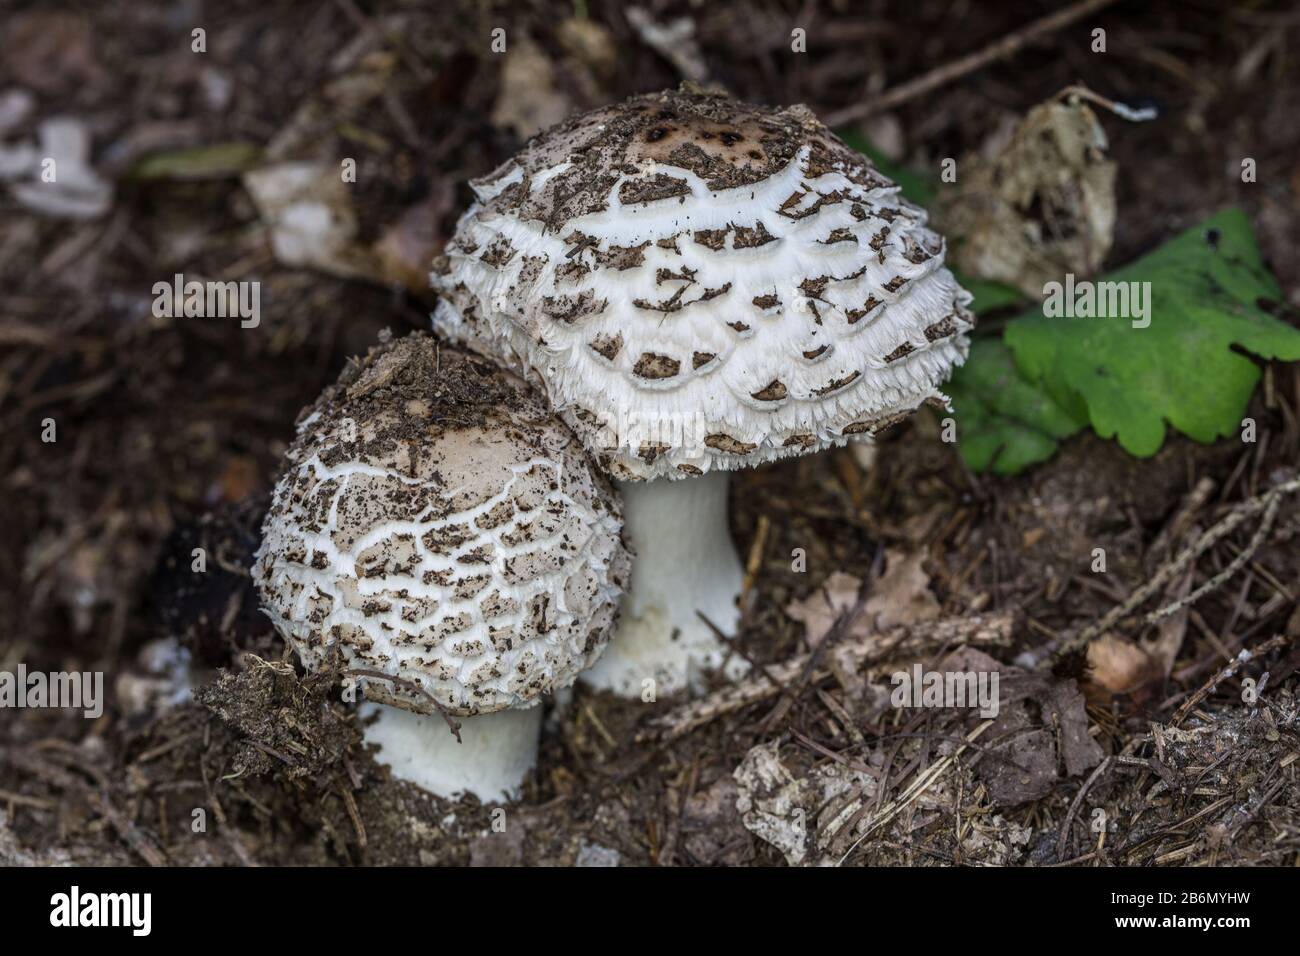 Edible mushrooms with mushroom caps on the forest floor Stock Photo